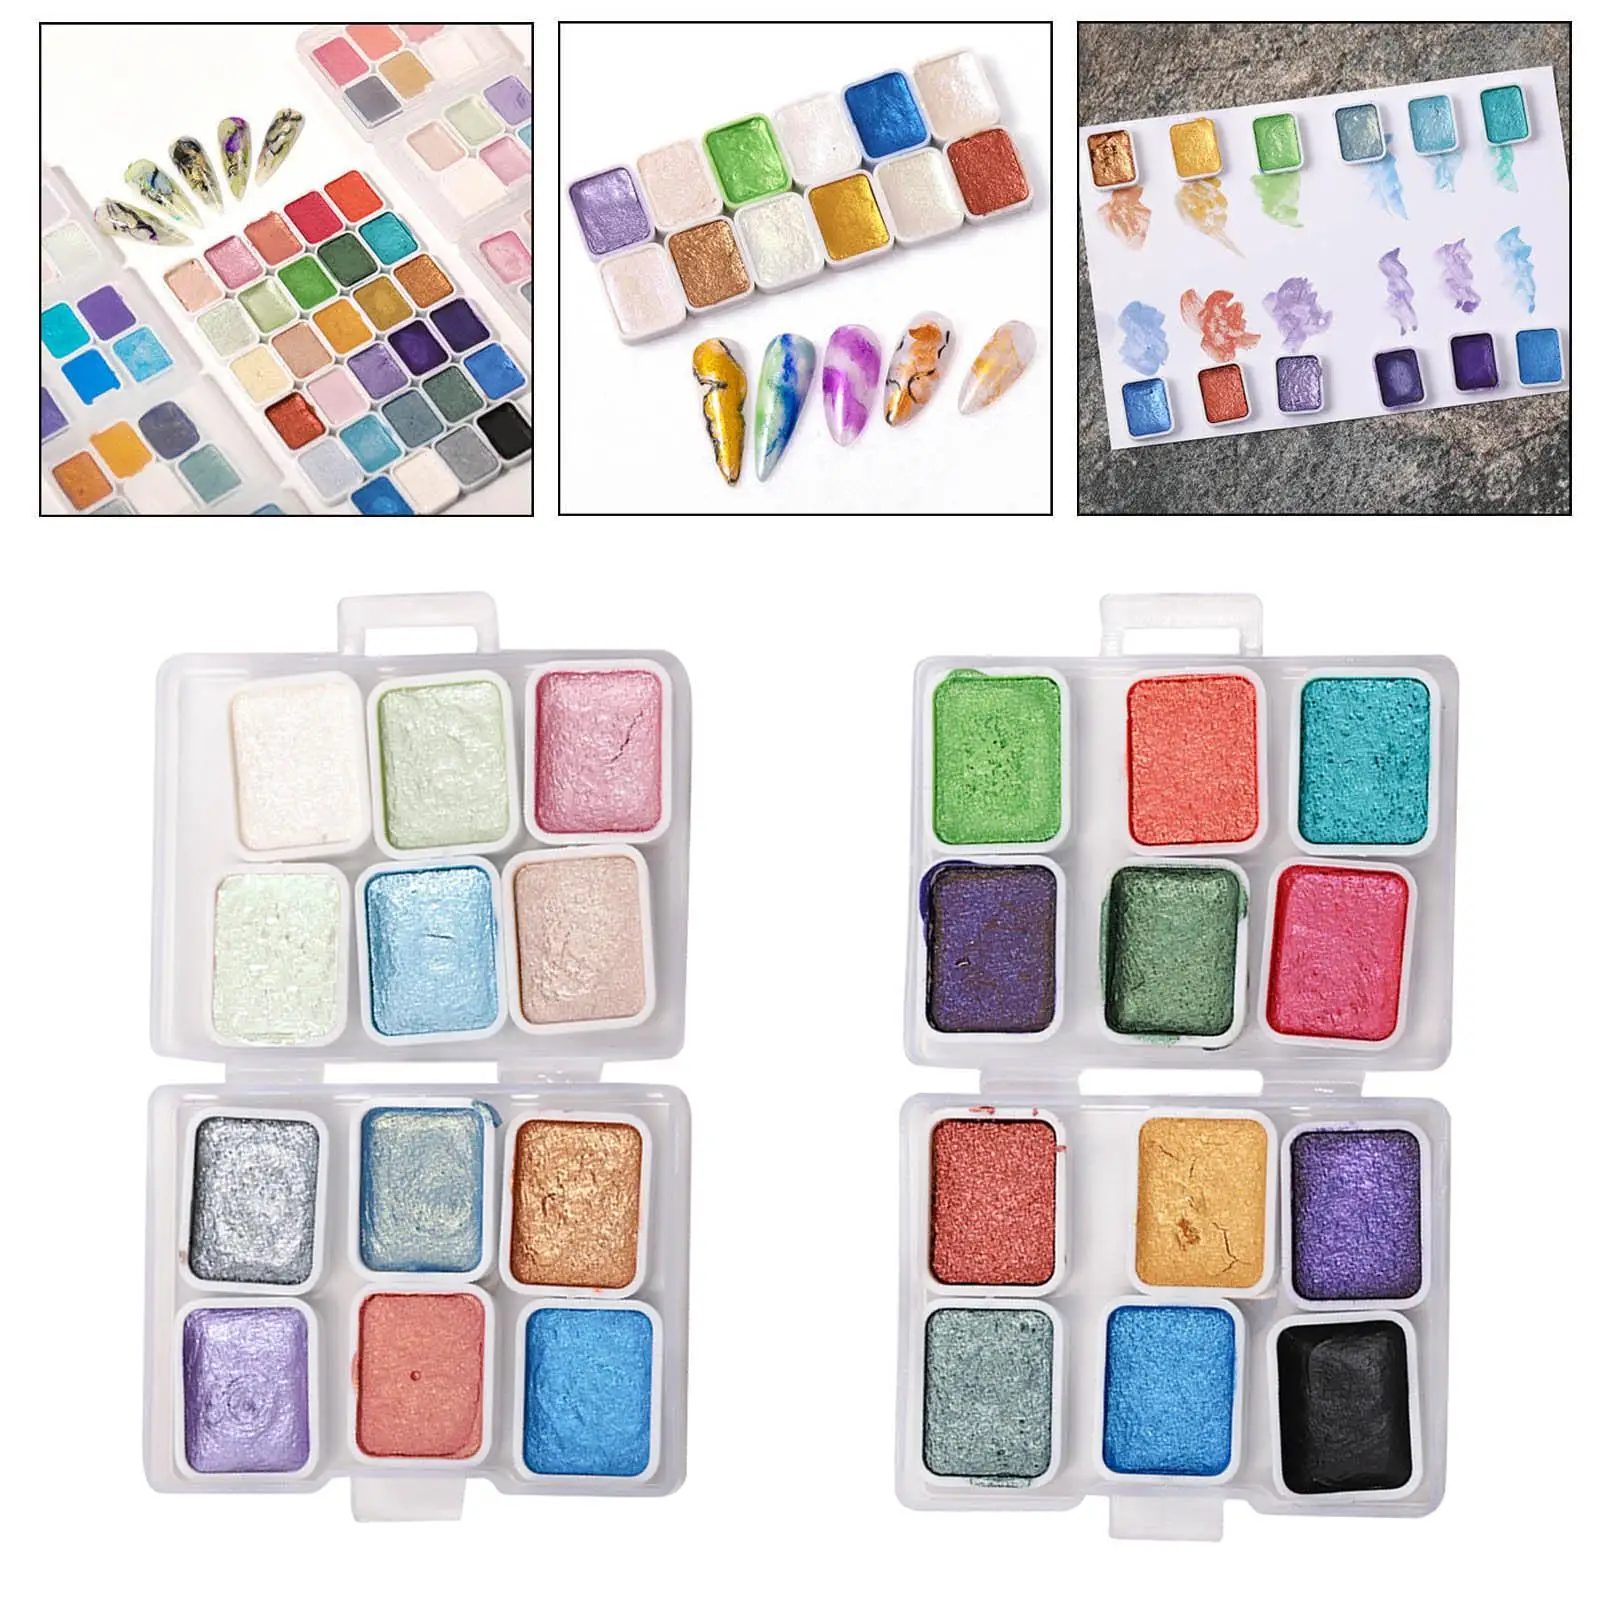 Watercolor Paints Set Shimmer Lightweight Portable Professional Solid Palette for Manicure Decor Travel Beginners Kids & Adults